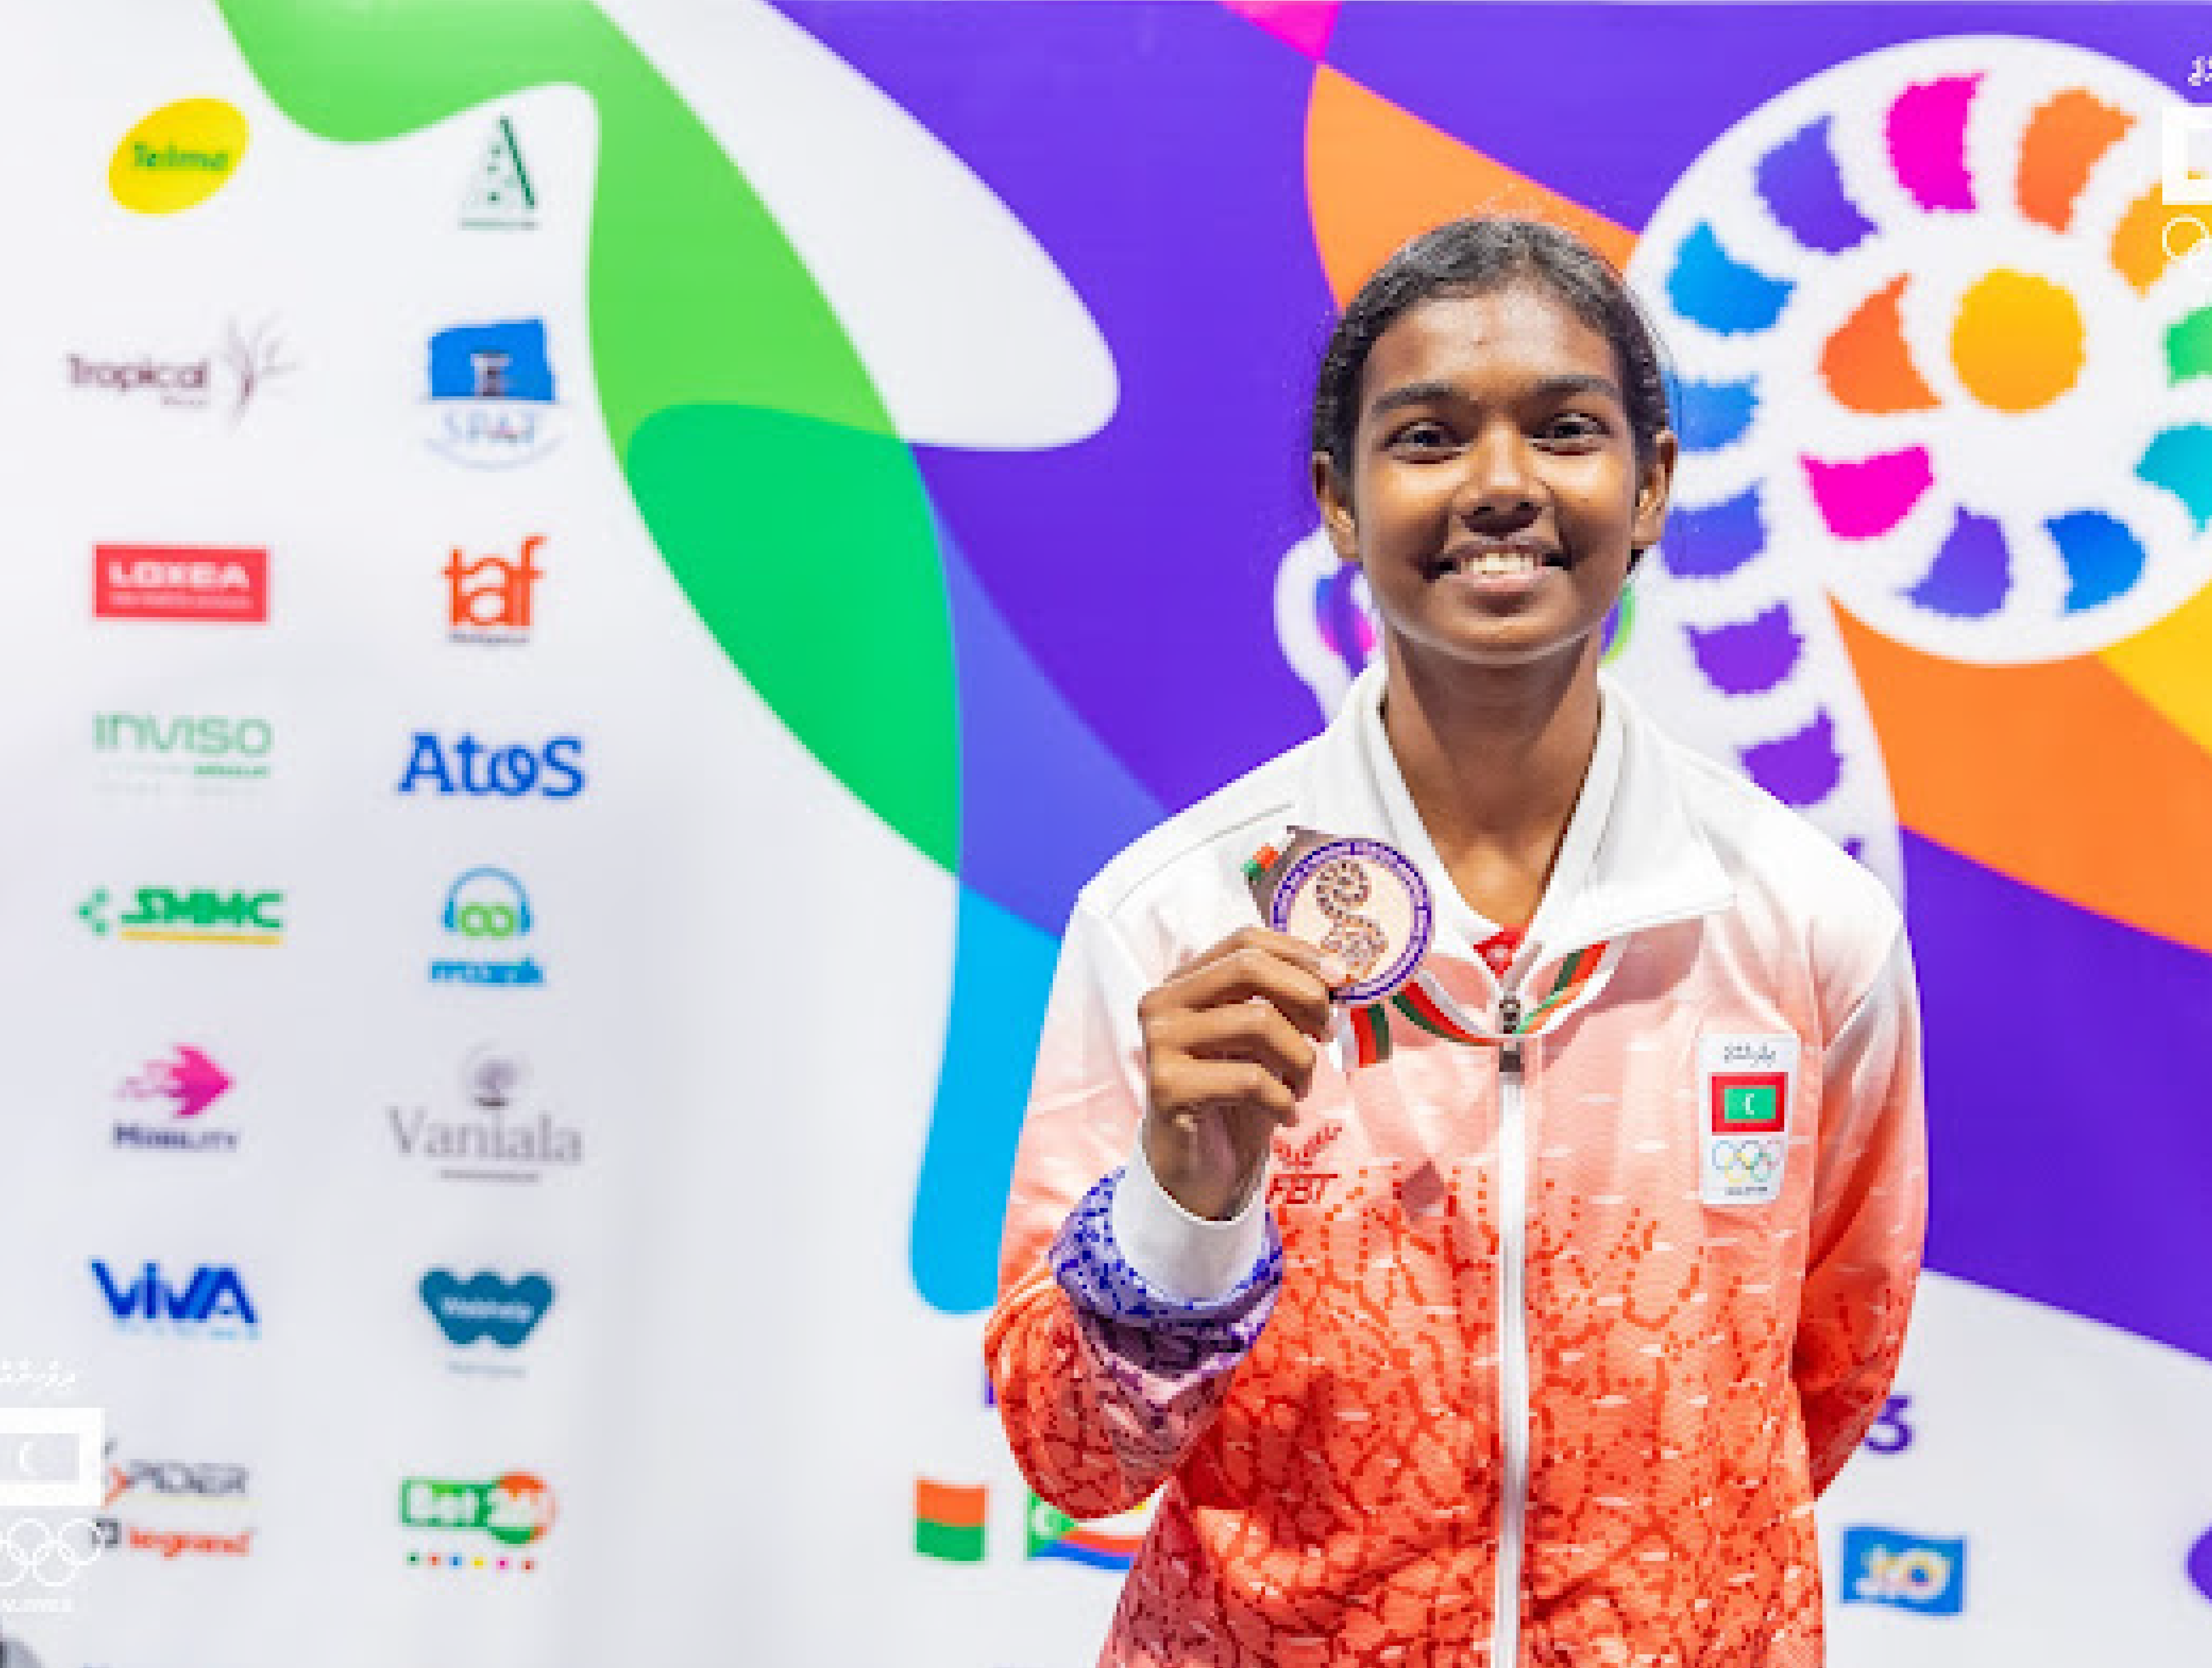 Ifa smiles for the camera as she poses with the bronze medal at the 2023 Indian Ocean Island Games © Mohamed Shabin via Ifa